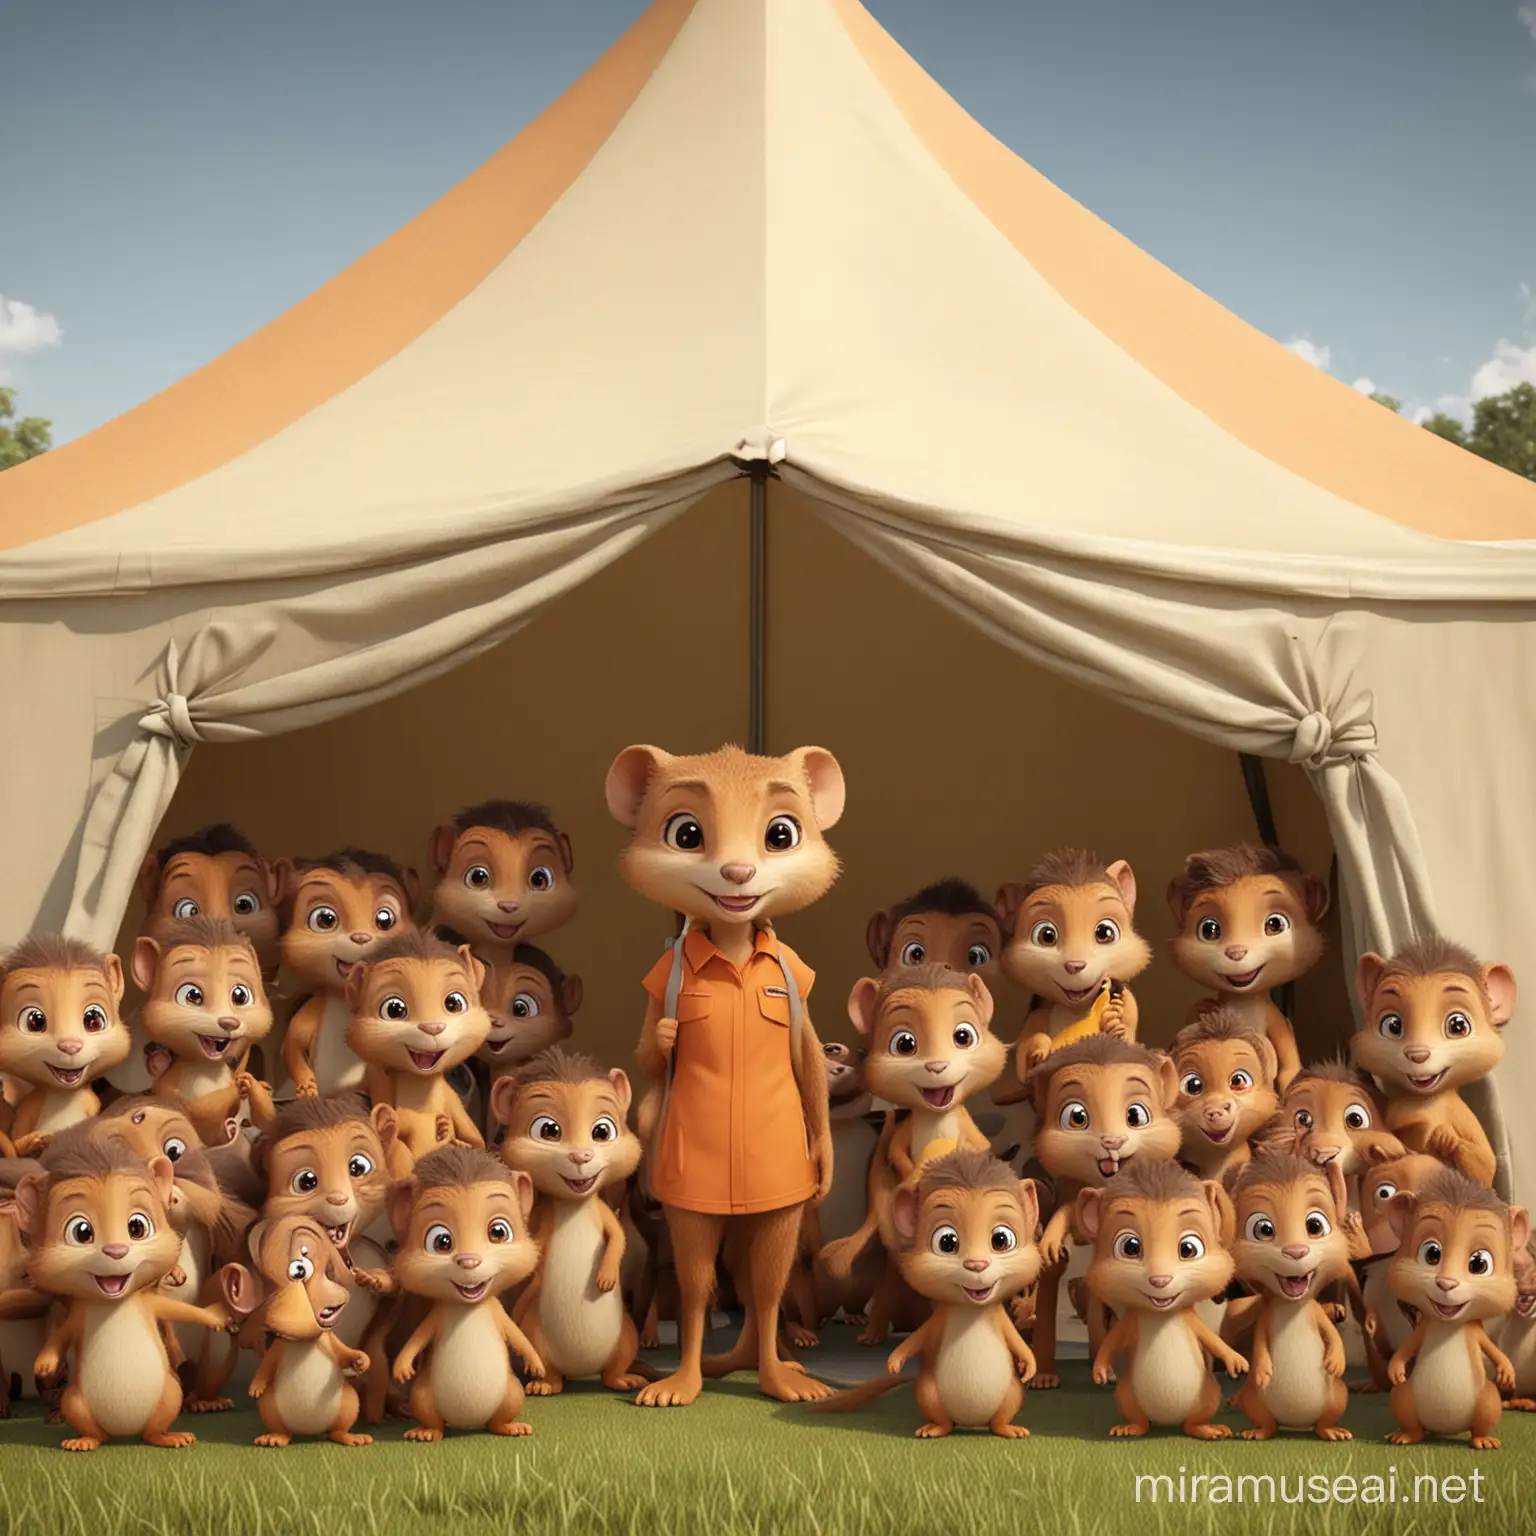 Adorable Cartoon Mongoose Hosting Playful Toddlers in a Marquee Tent